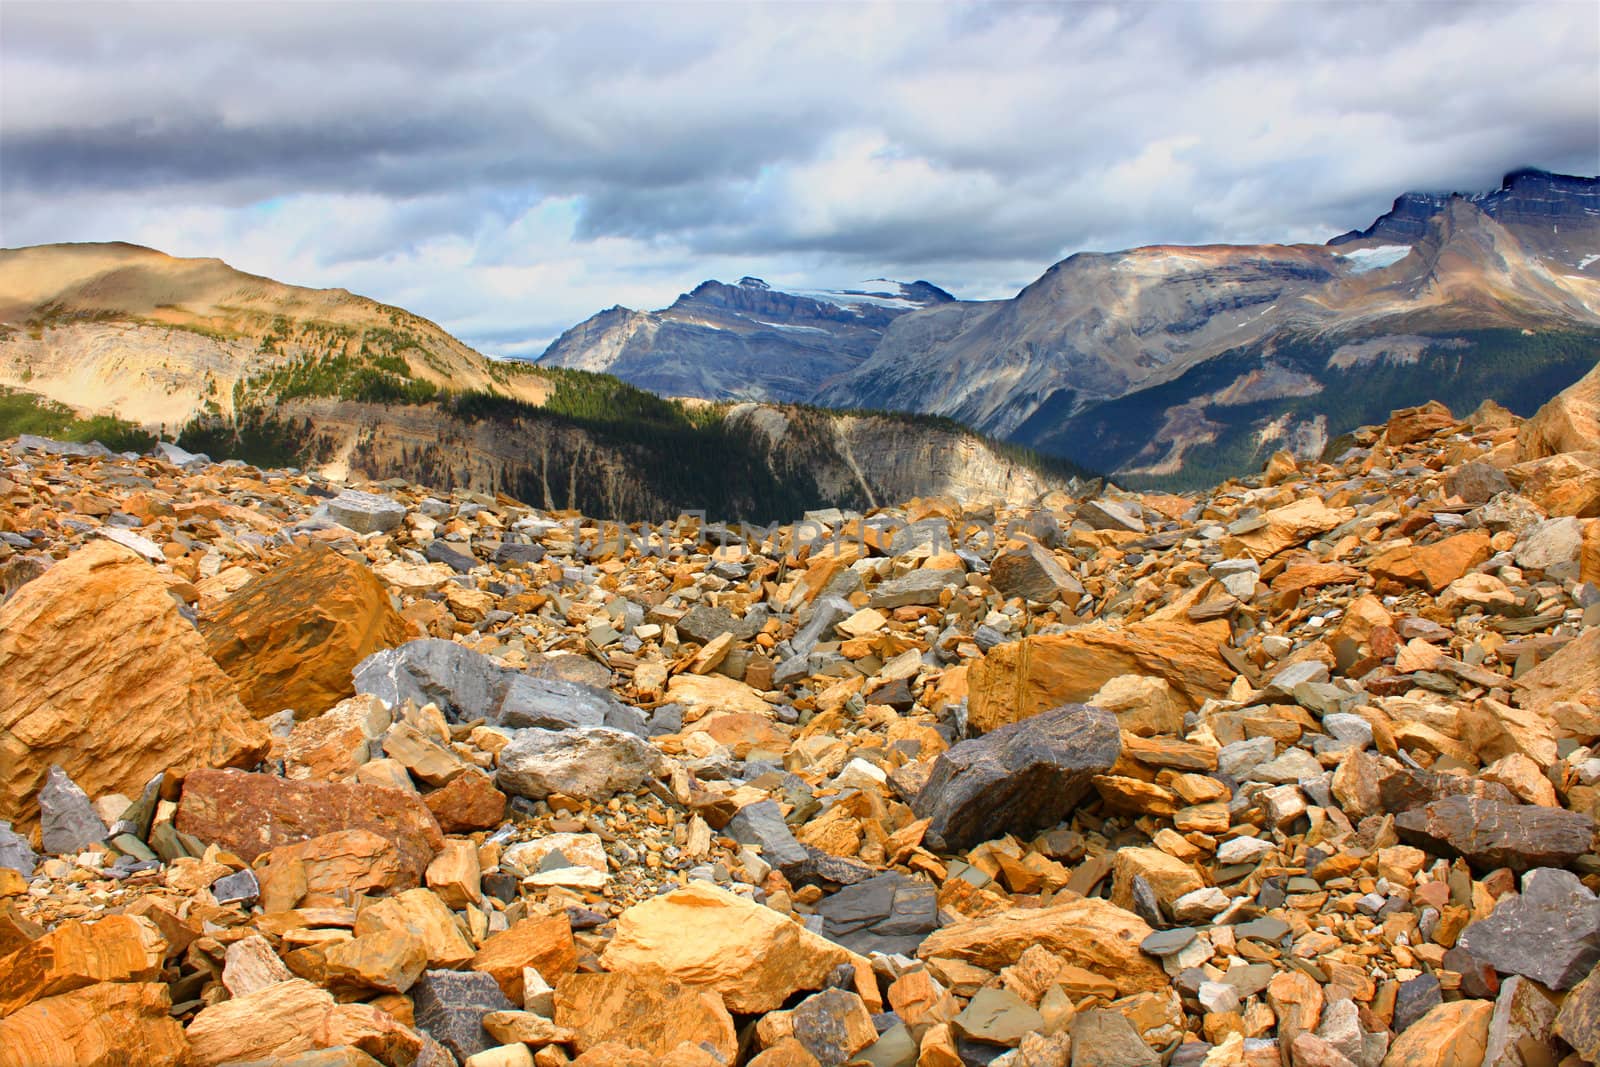 Rocks exposed from receding glaciers of Yoho National Park in Canada.